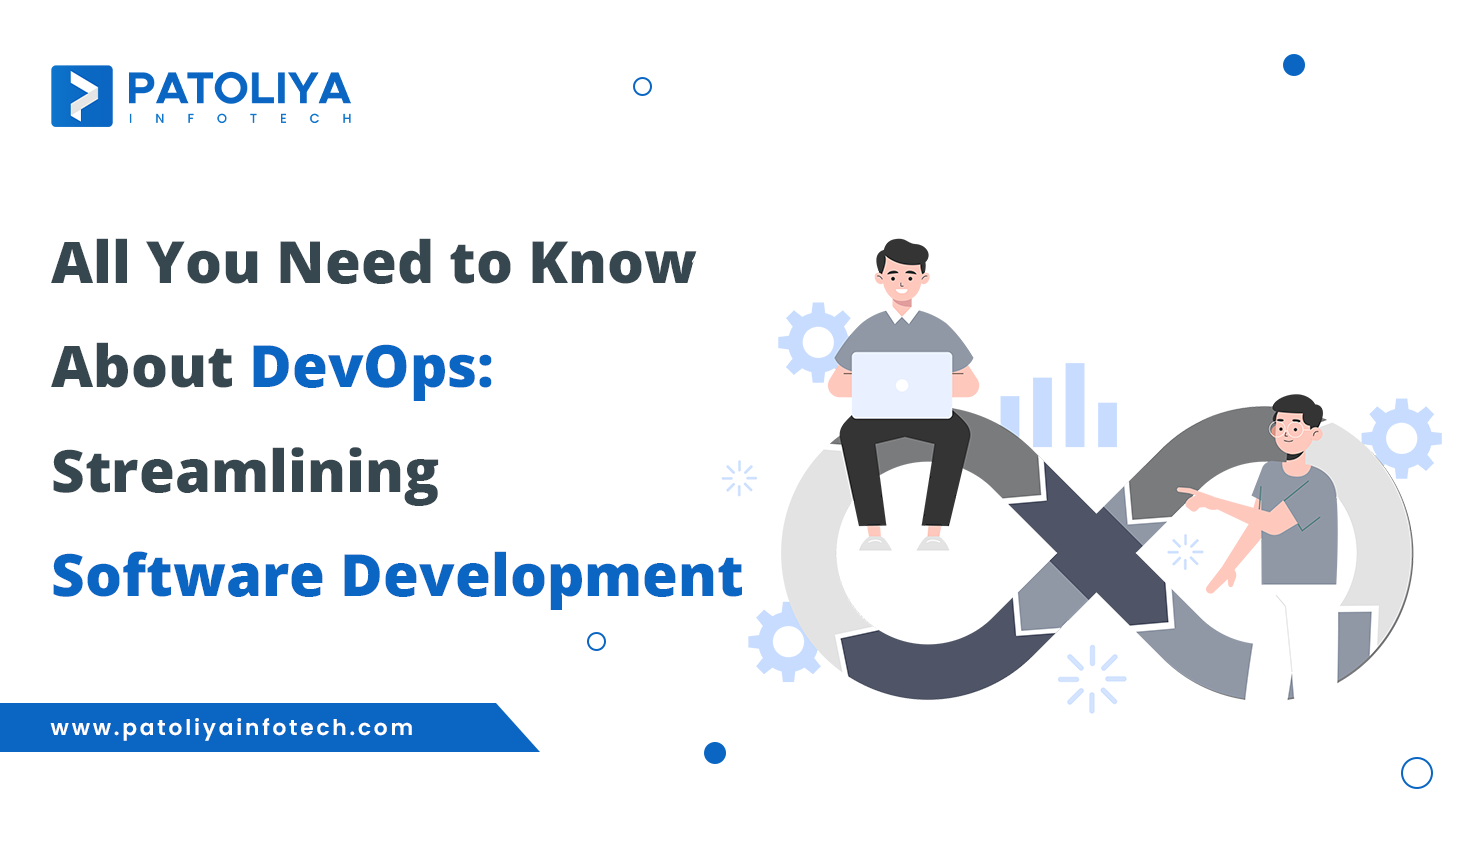 All You Need to Know About DevOps: Streamlining Software Development